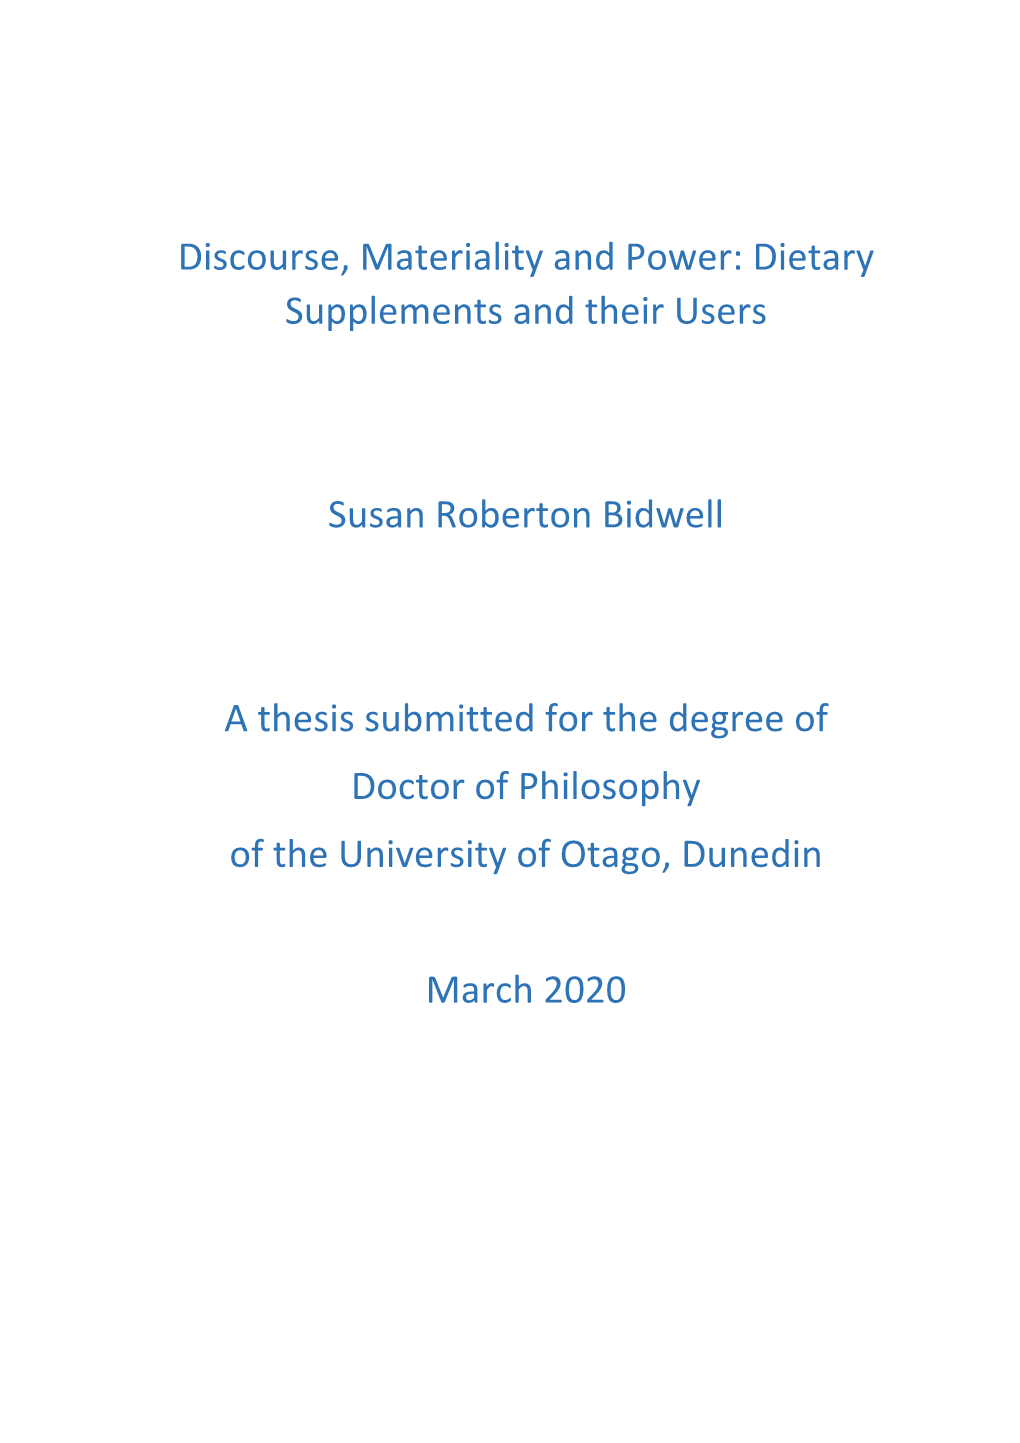 Discourse, Materiality and Power: Dietary Supplements and Their Users Susan Roberton Bidwell a Thesis Submitted for the Degree